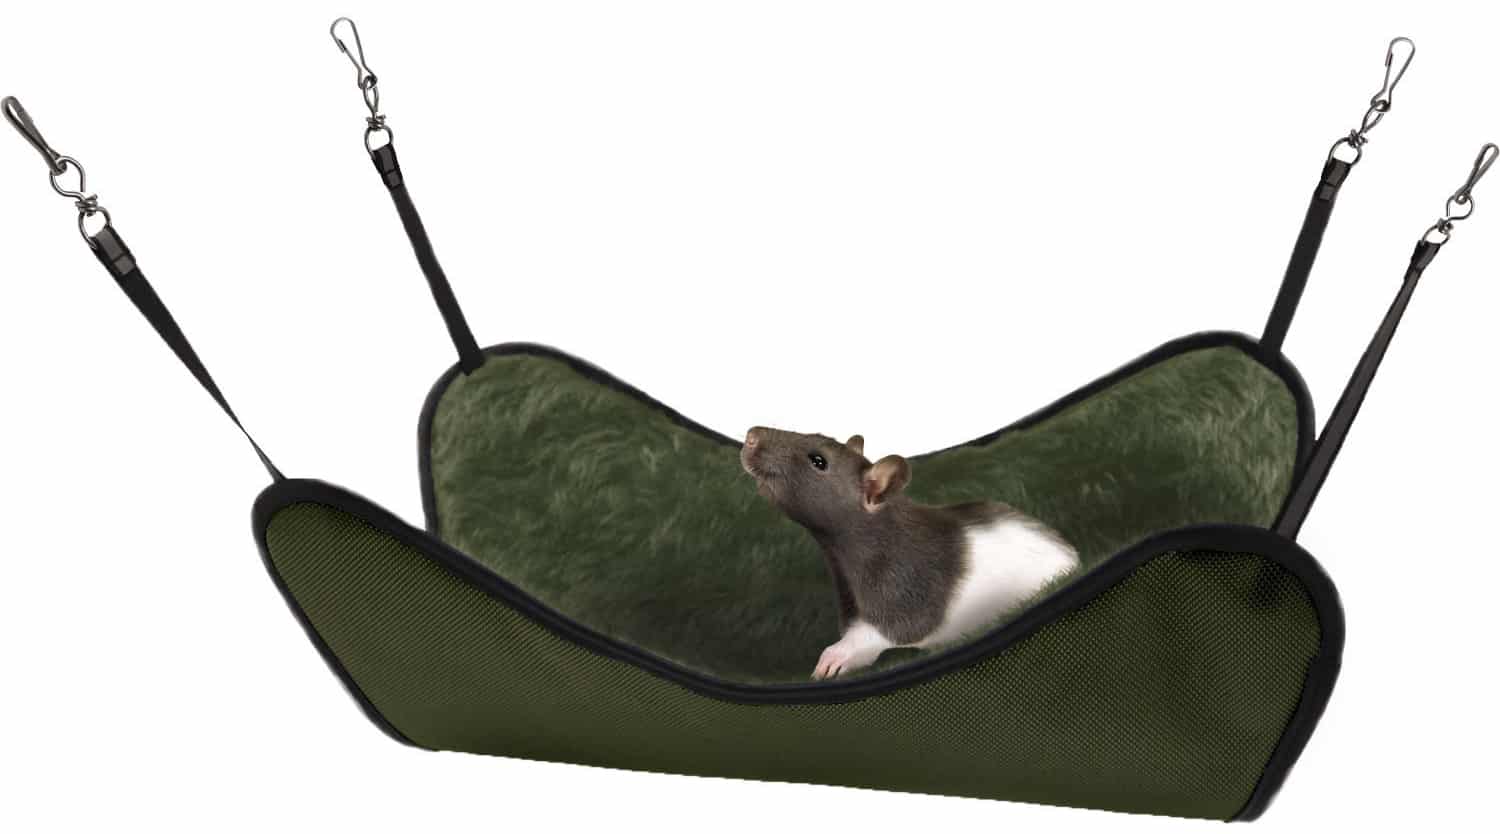 How To Make A Rat Hammock